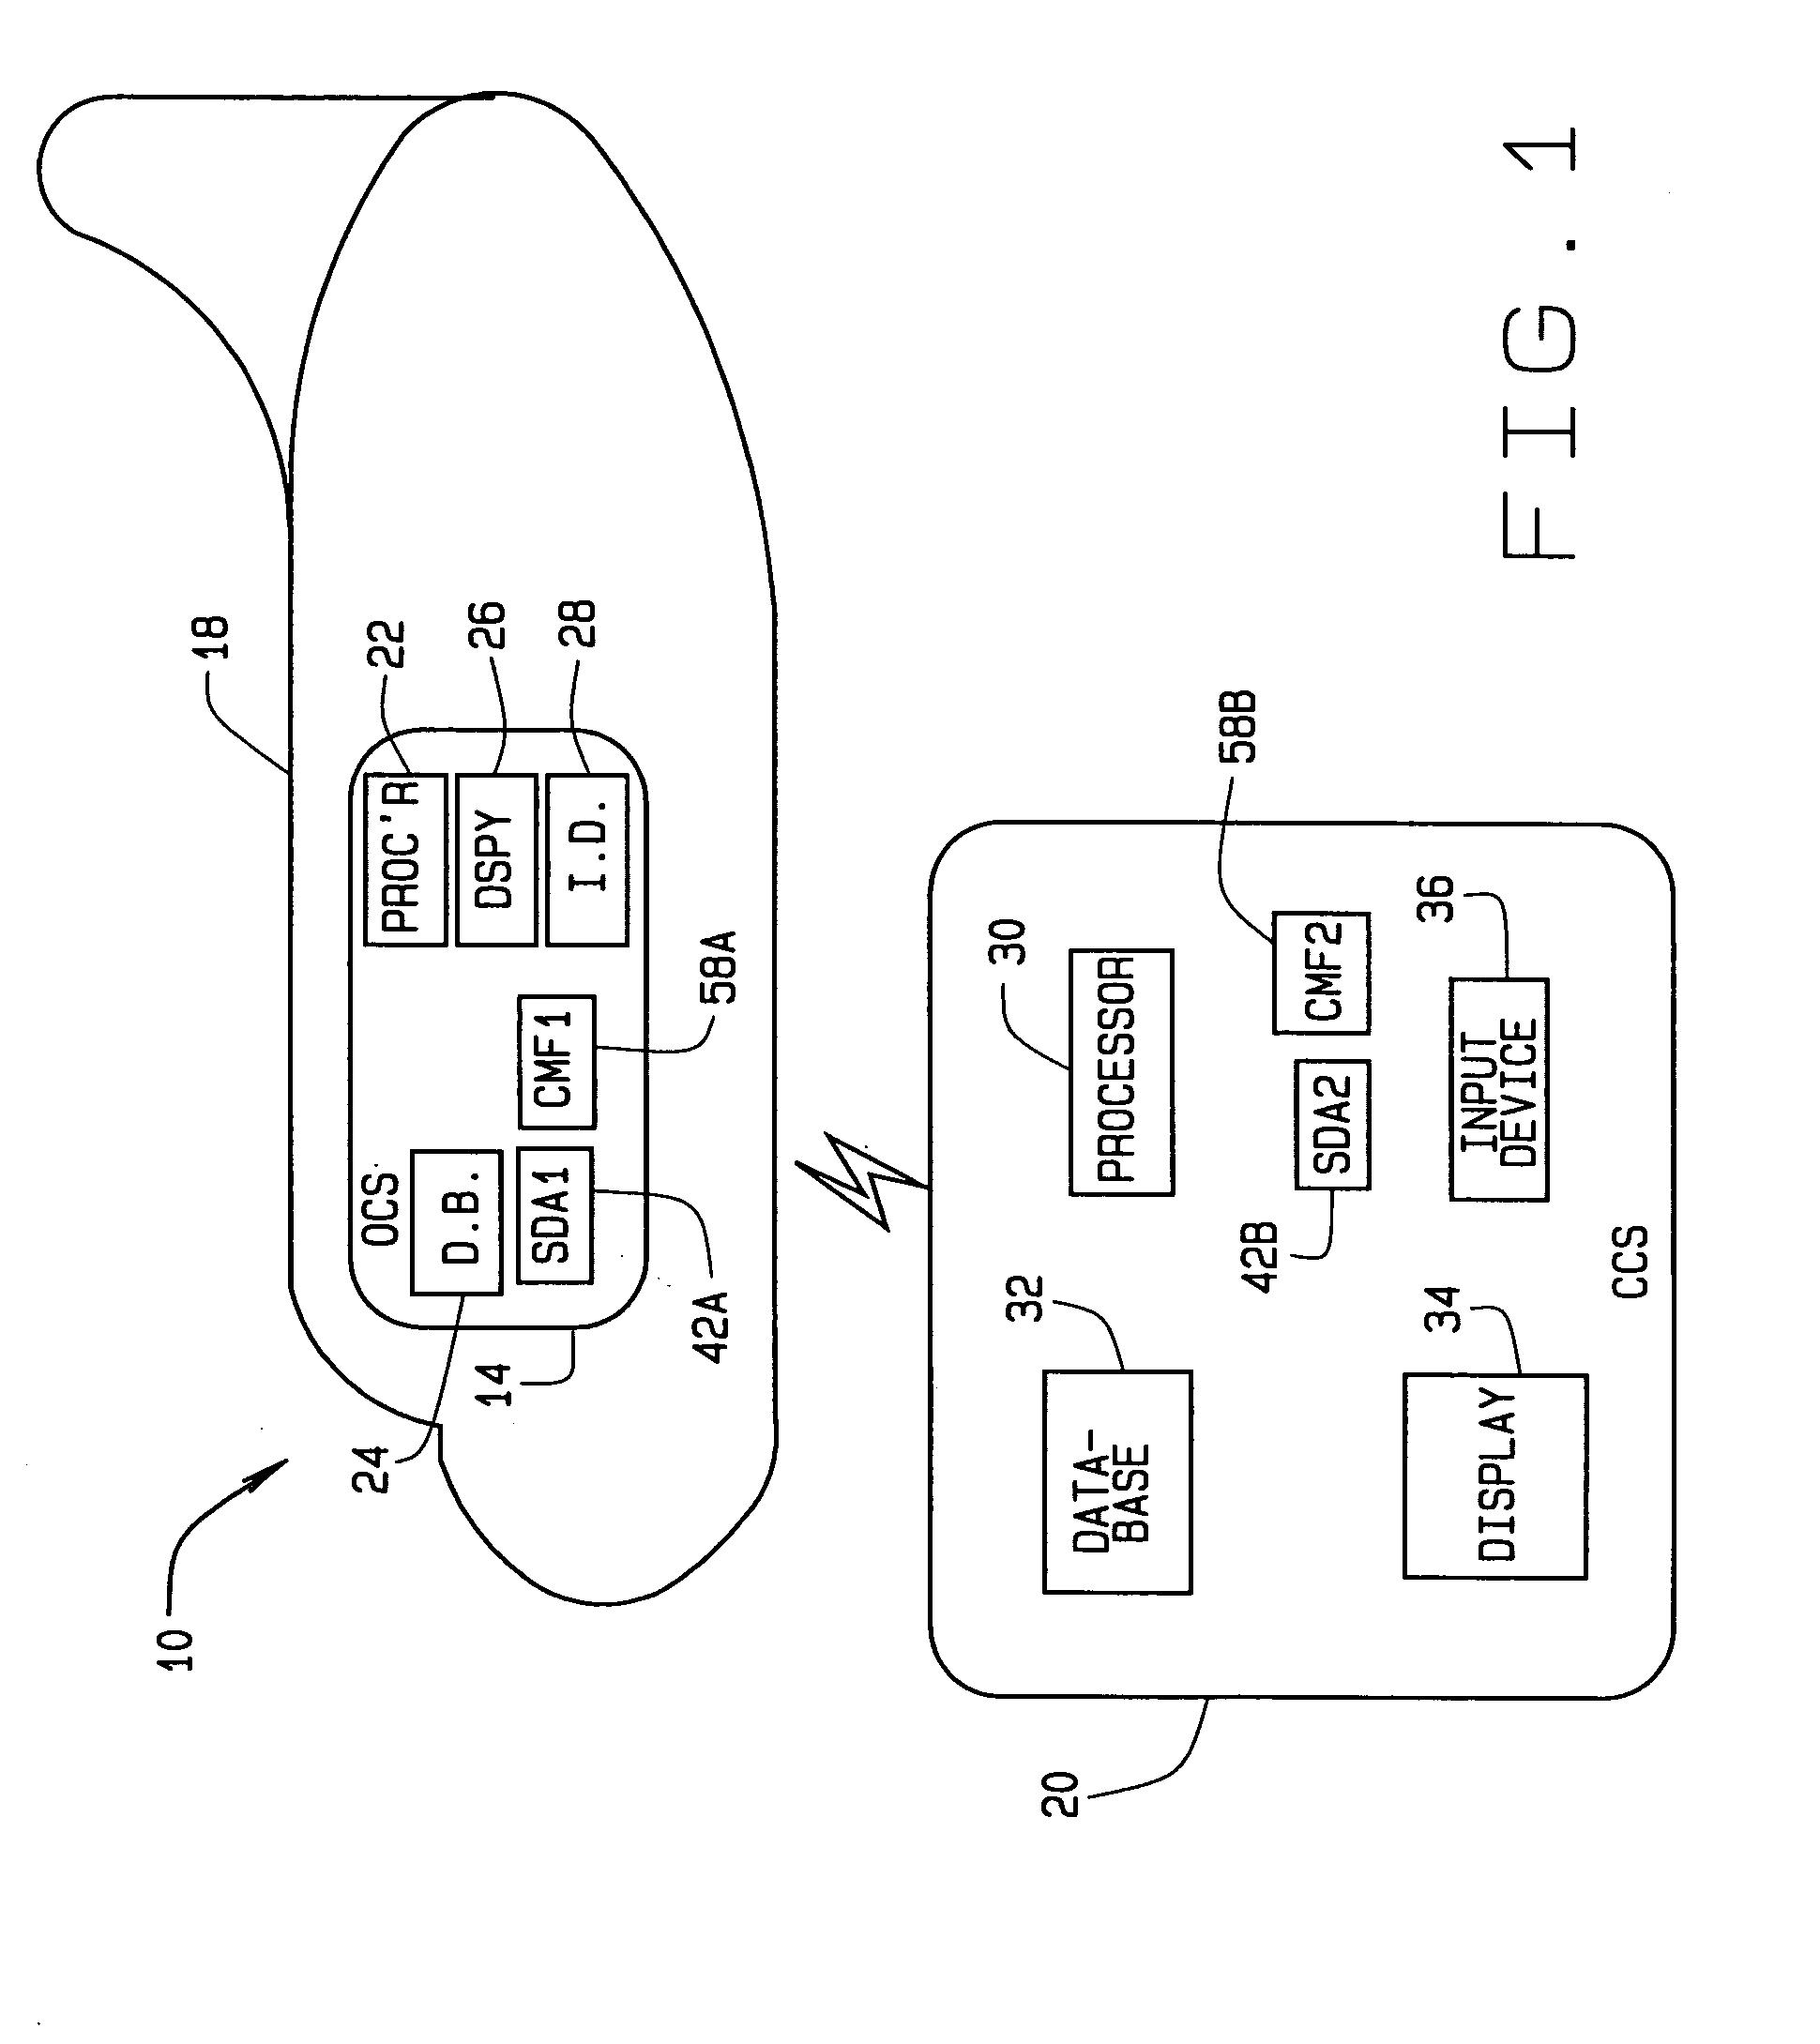 Real-time electronic signature validation systems and methods